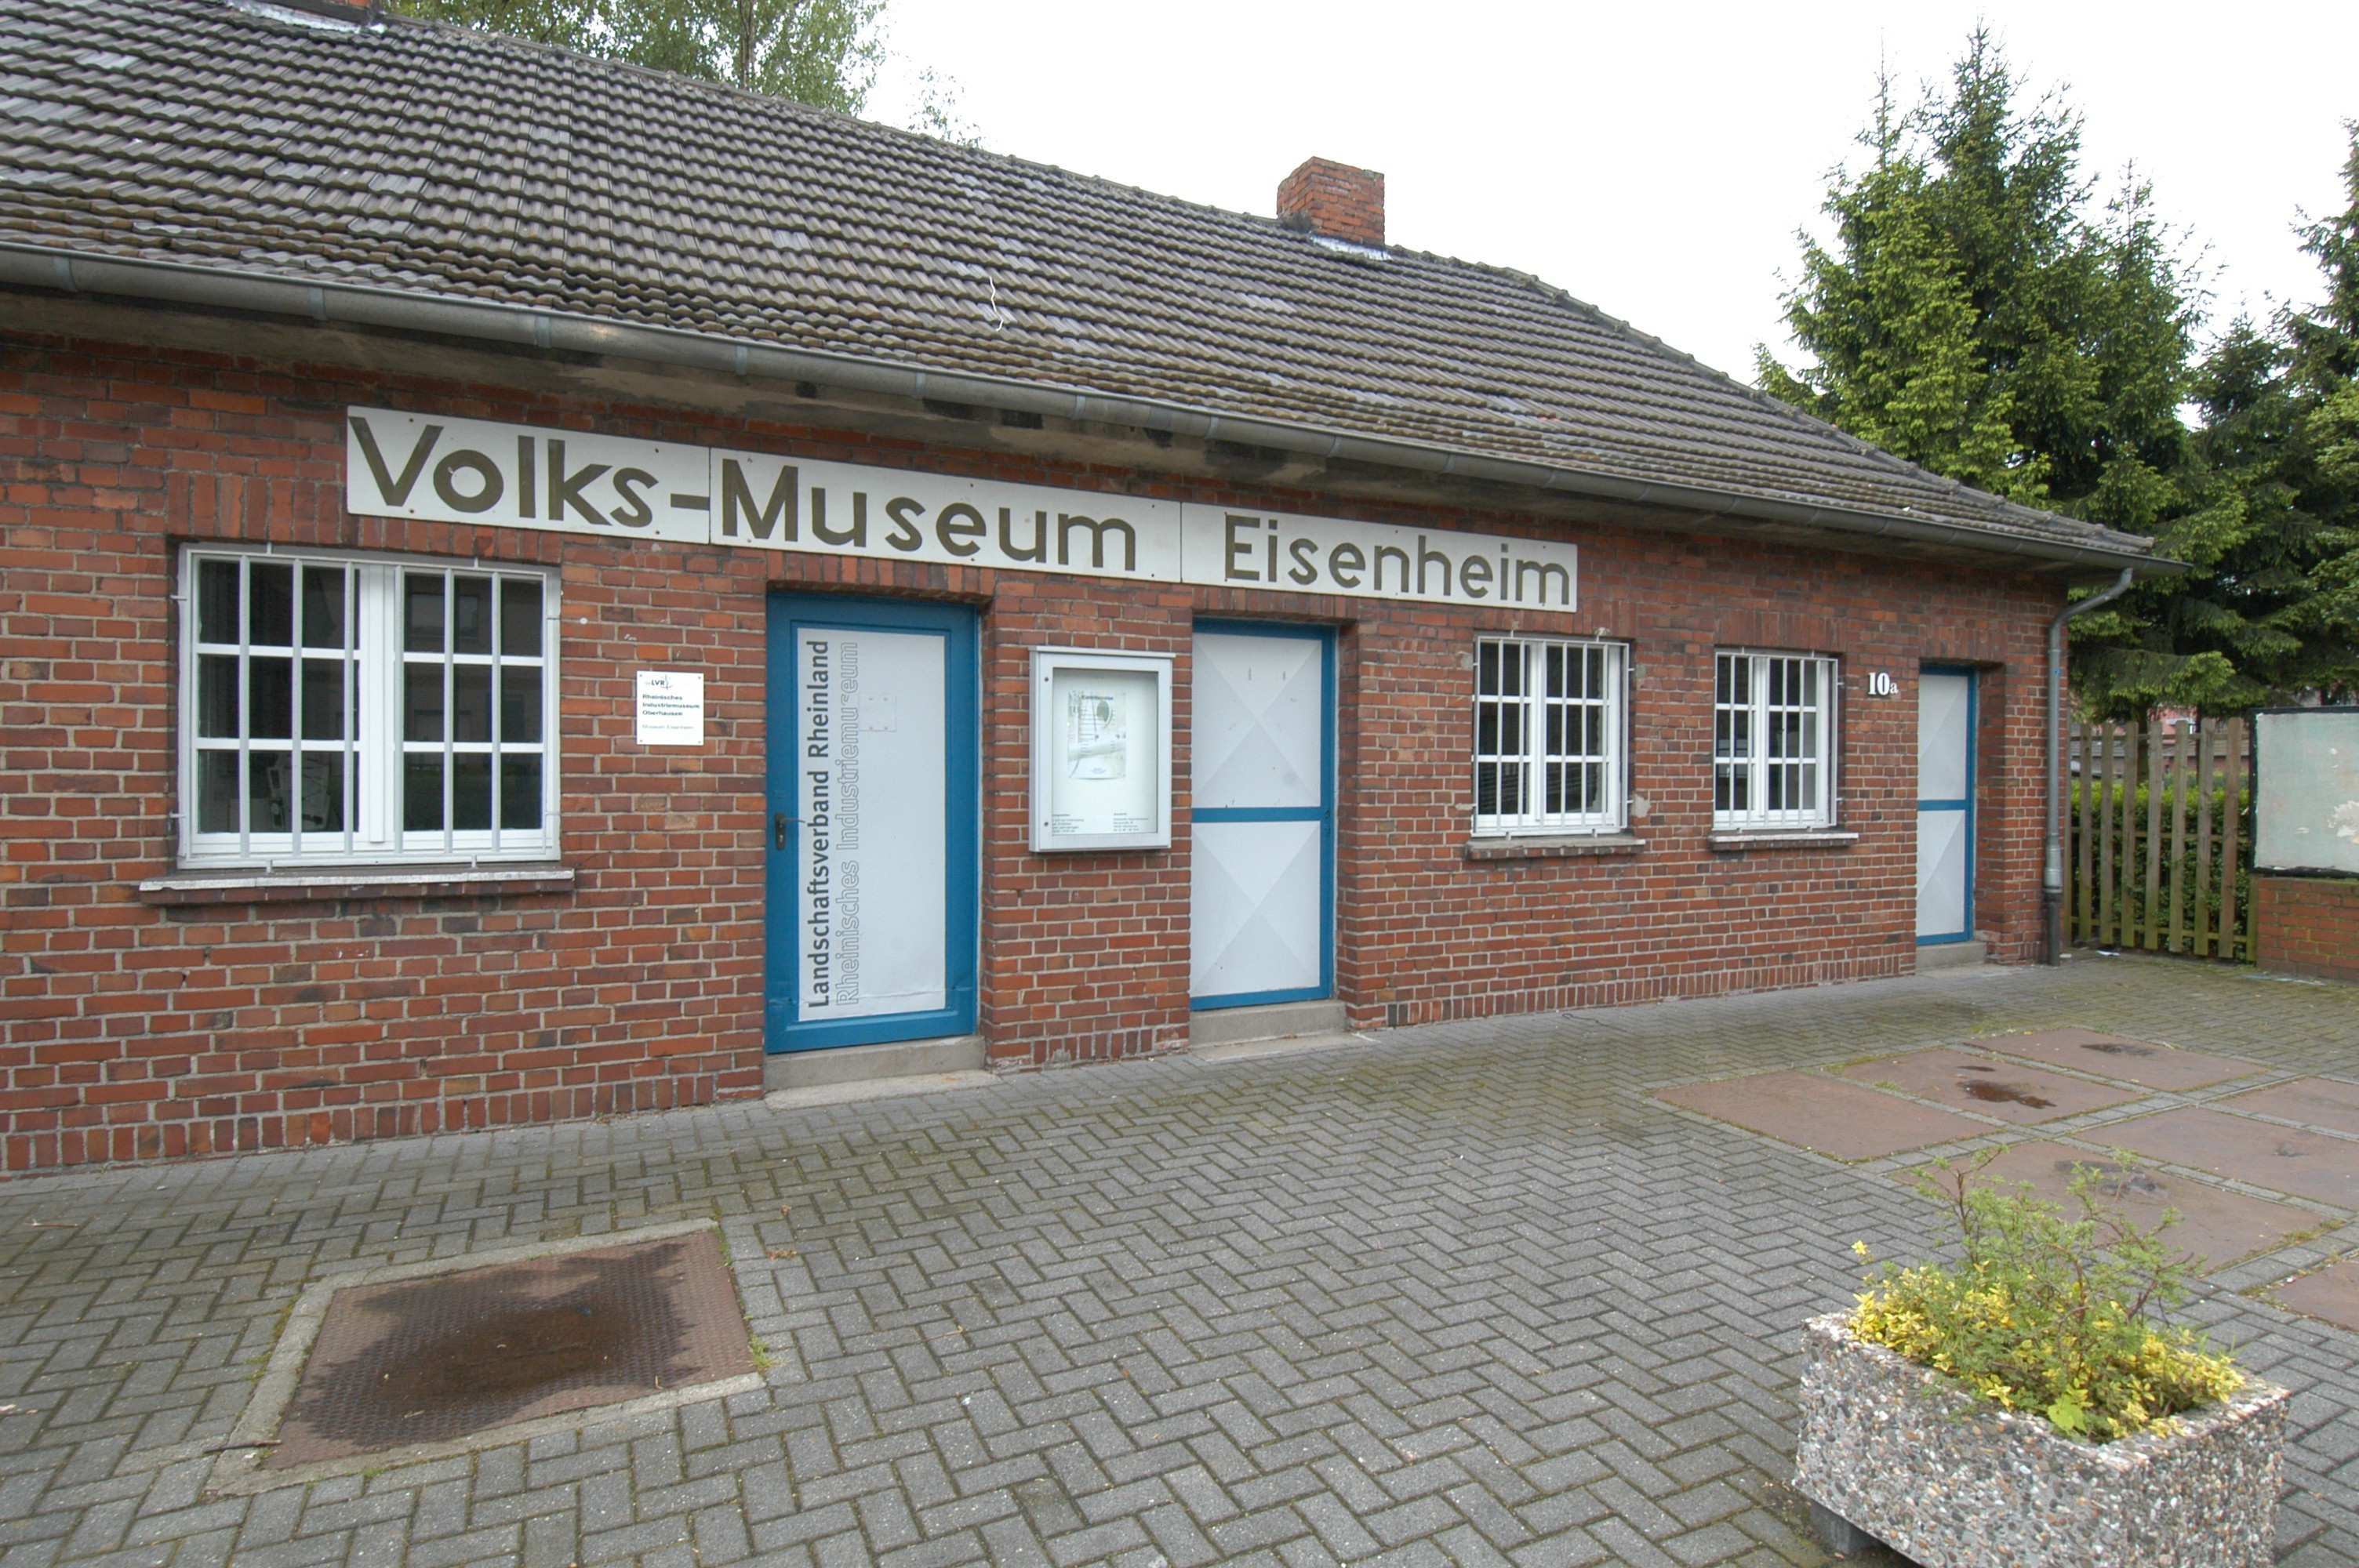 The Volks-Museum is the first destination for visitors. This former washhouse was originally furnished by the people from Eisenheim themselves. Since it was taken over by the LVR in 1989, the team from LVR-Industriemuseum has supplemented the exhibition and updated it in accordance with the latest research status.